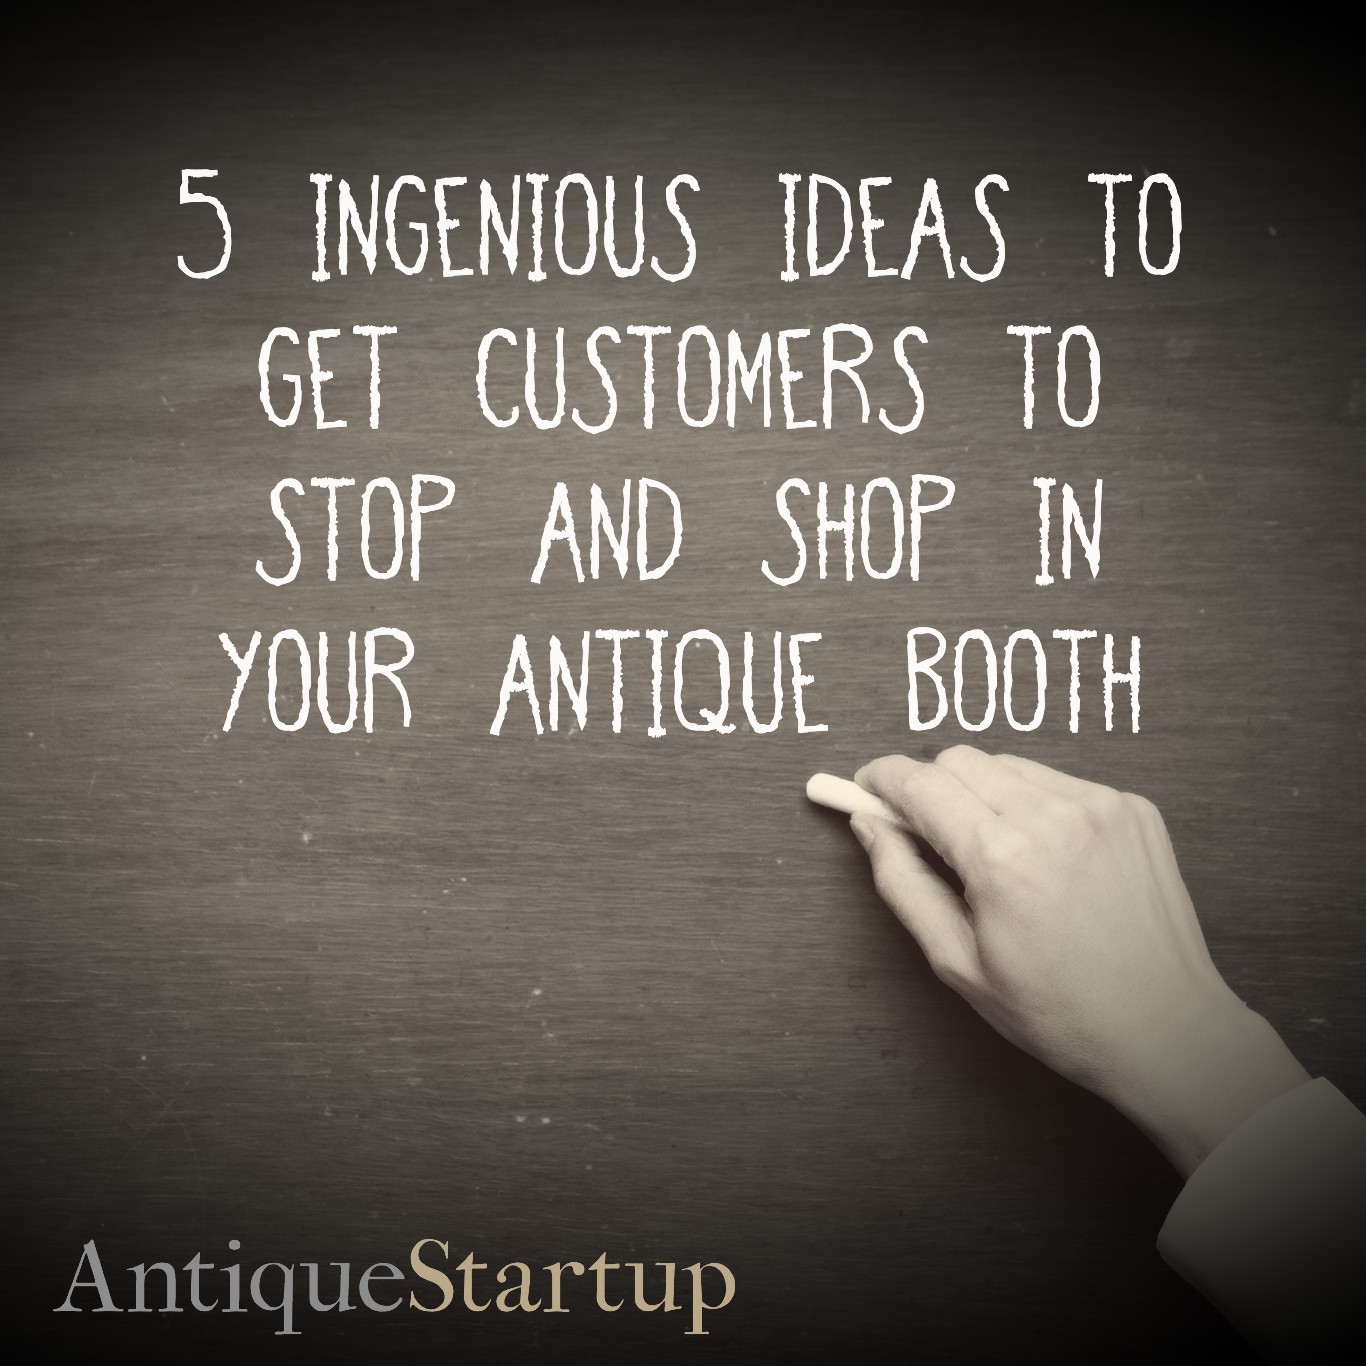 AntiqueStartup.com Antique Booth Stop and Shop